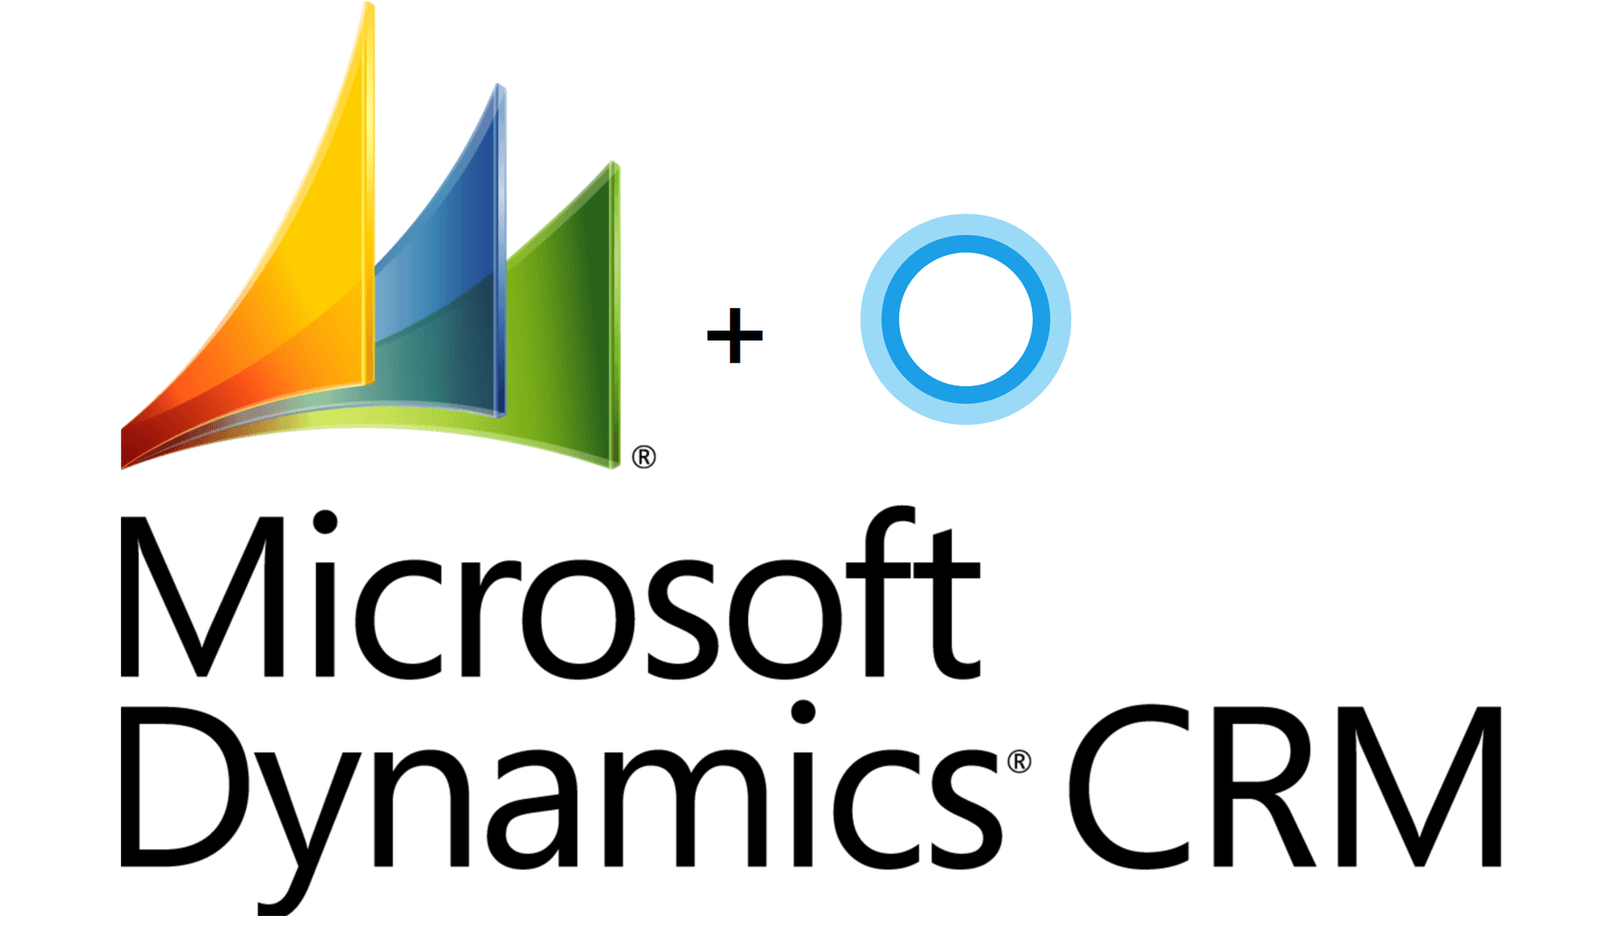 Dynamics CRM Logo - Microsoft adds Dynamics CRM support to Cortana through Connected ...